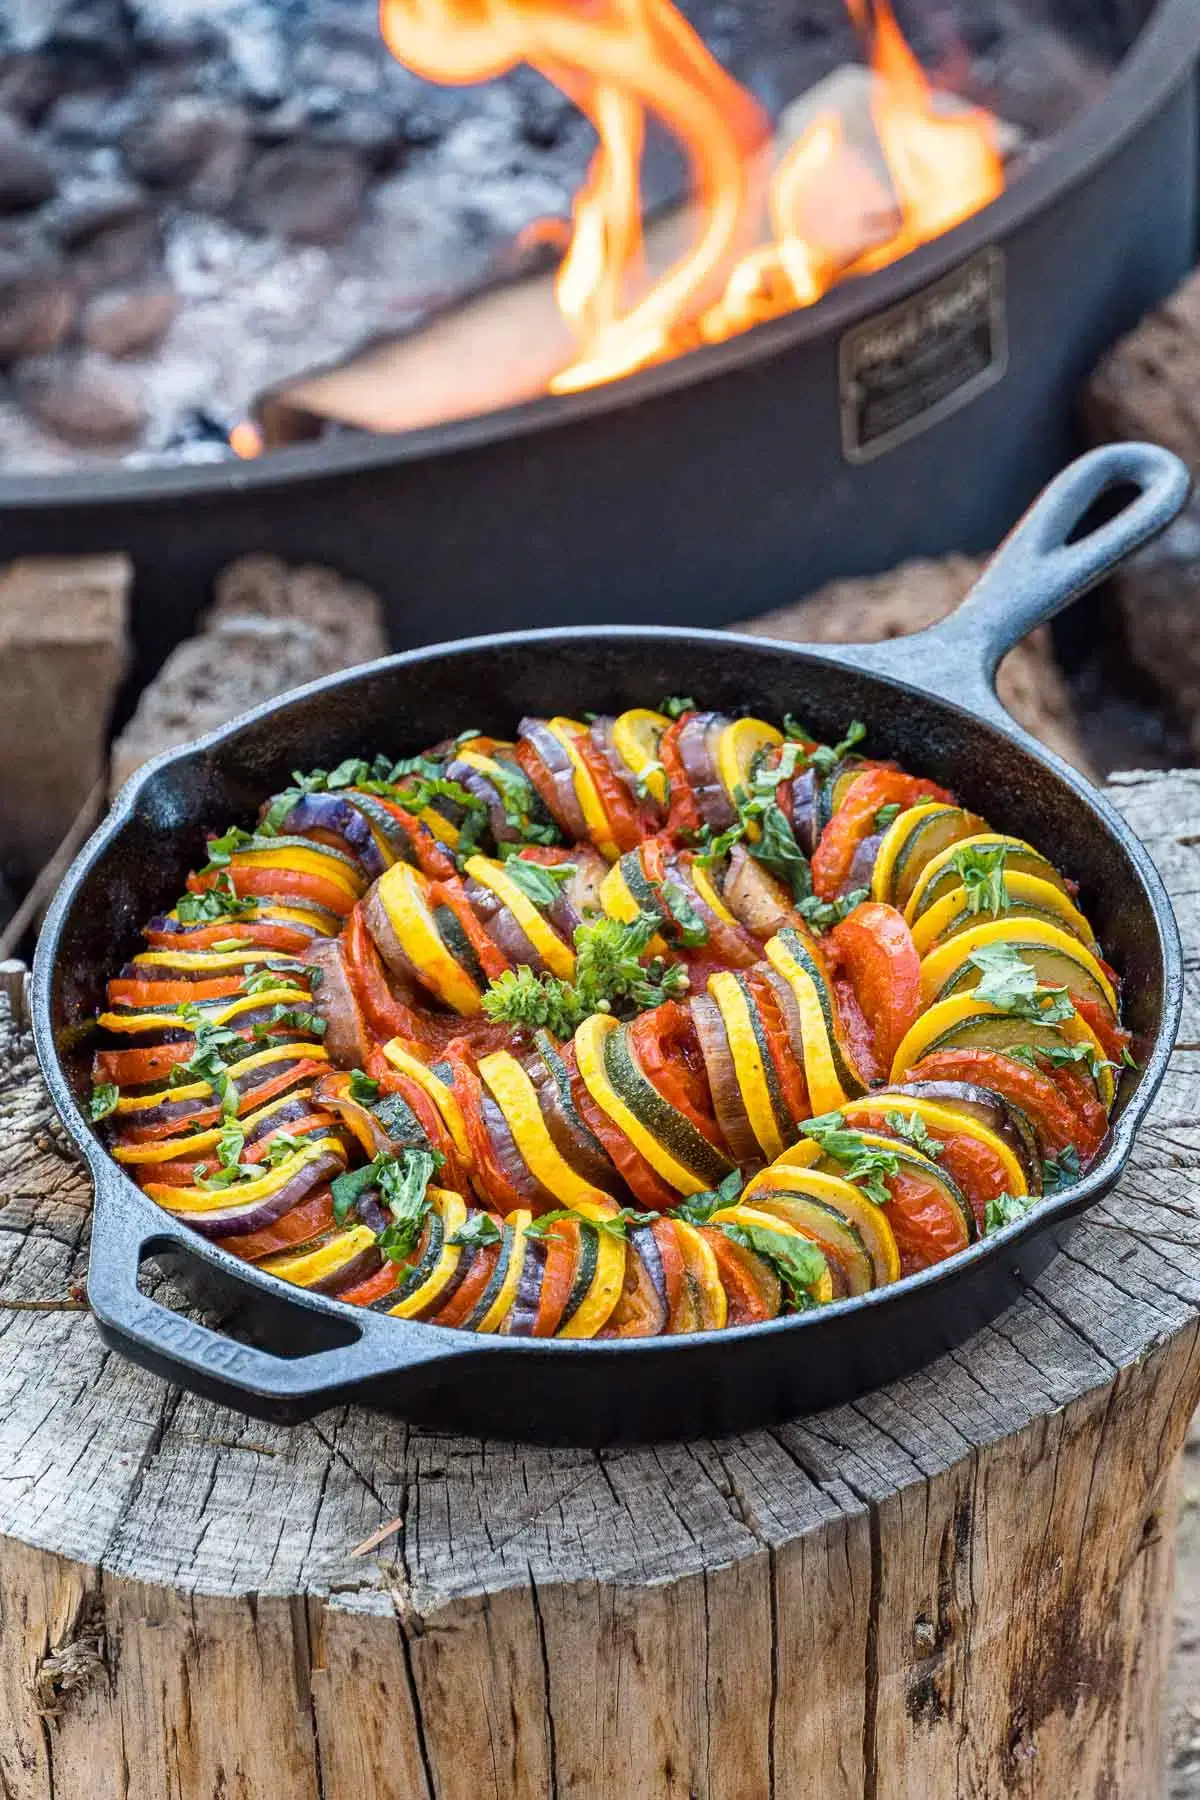 skillet of sliced vegetables on wooden table in front of campfire.